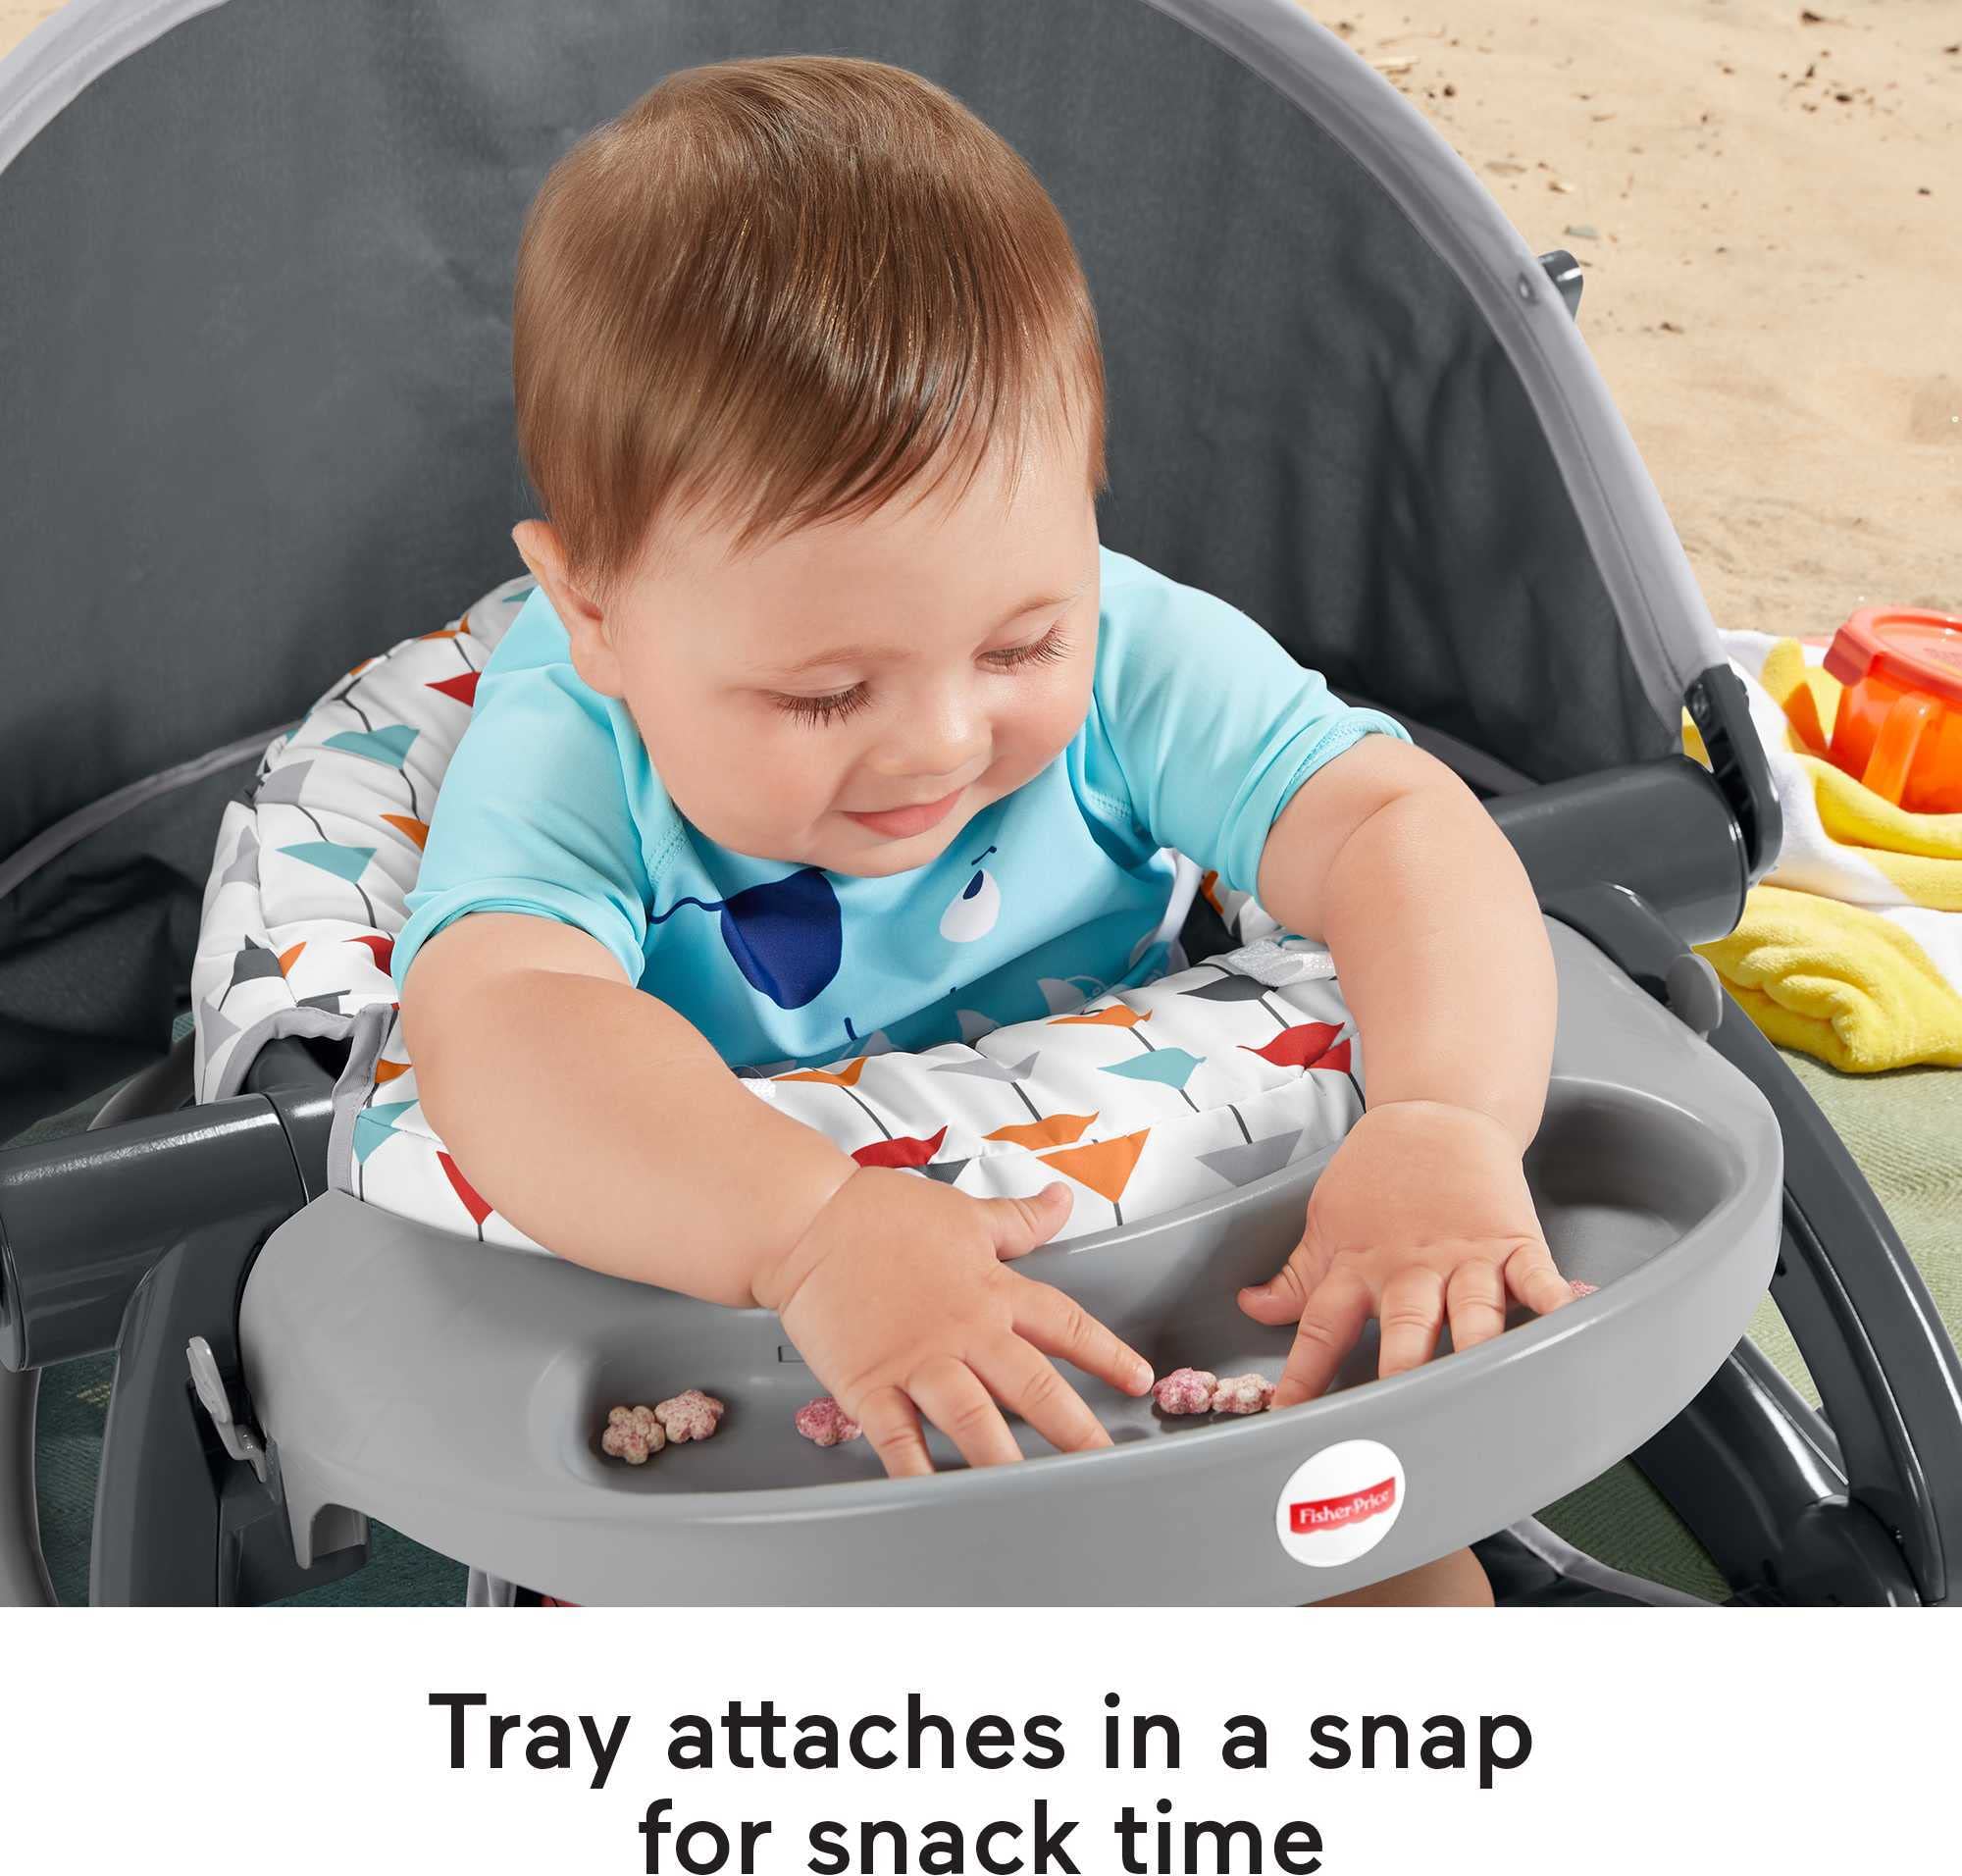 Fisher-Price Baby Travel Baby Chair On-The-Go Sit-Me-Up Floor Seat with Snack Tray and Canopy for Outdoor Use, Arrows Away